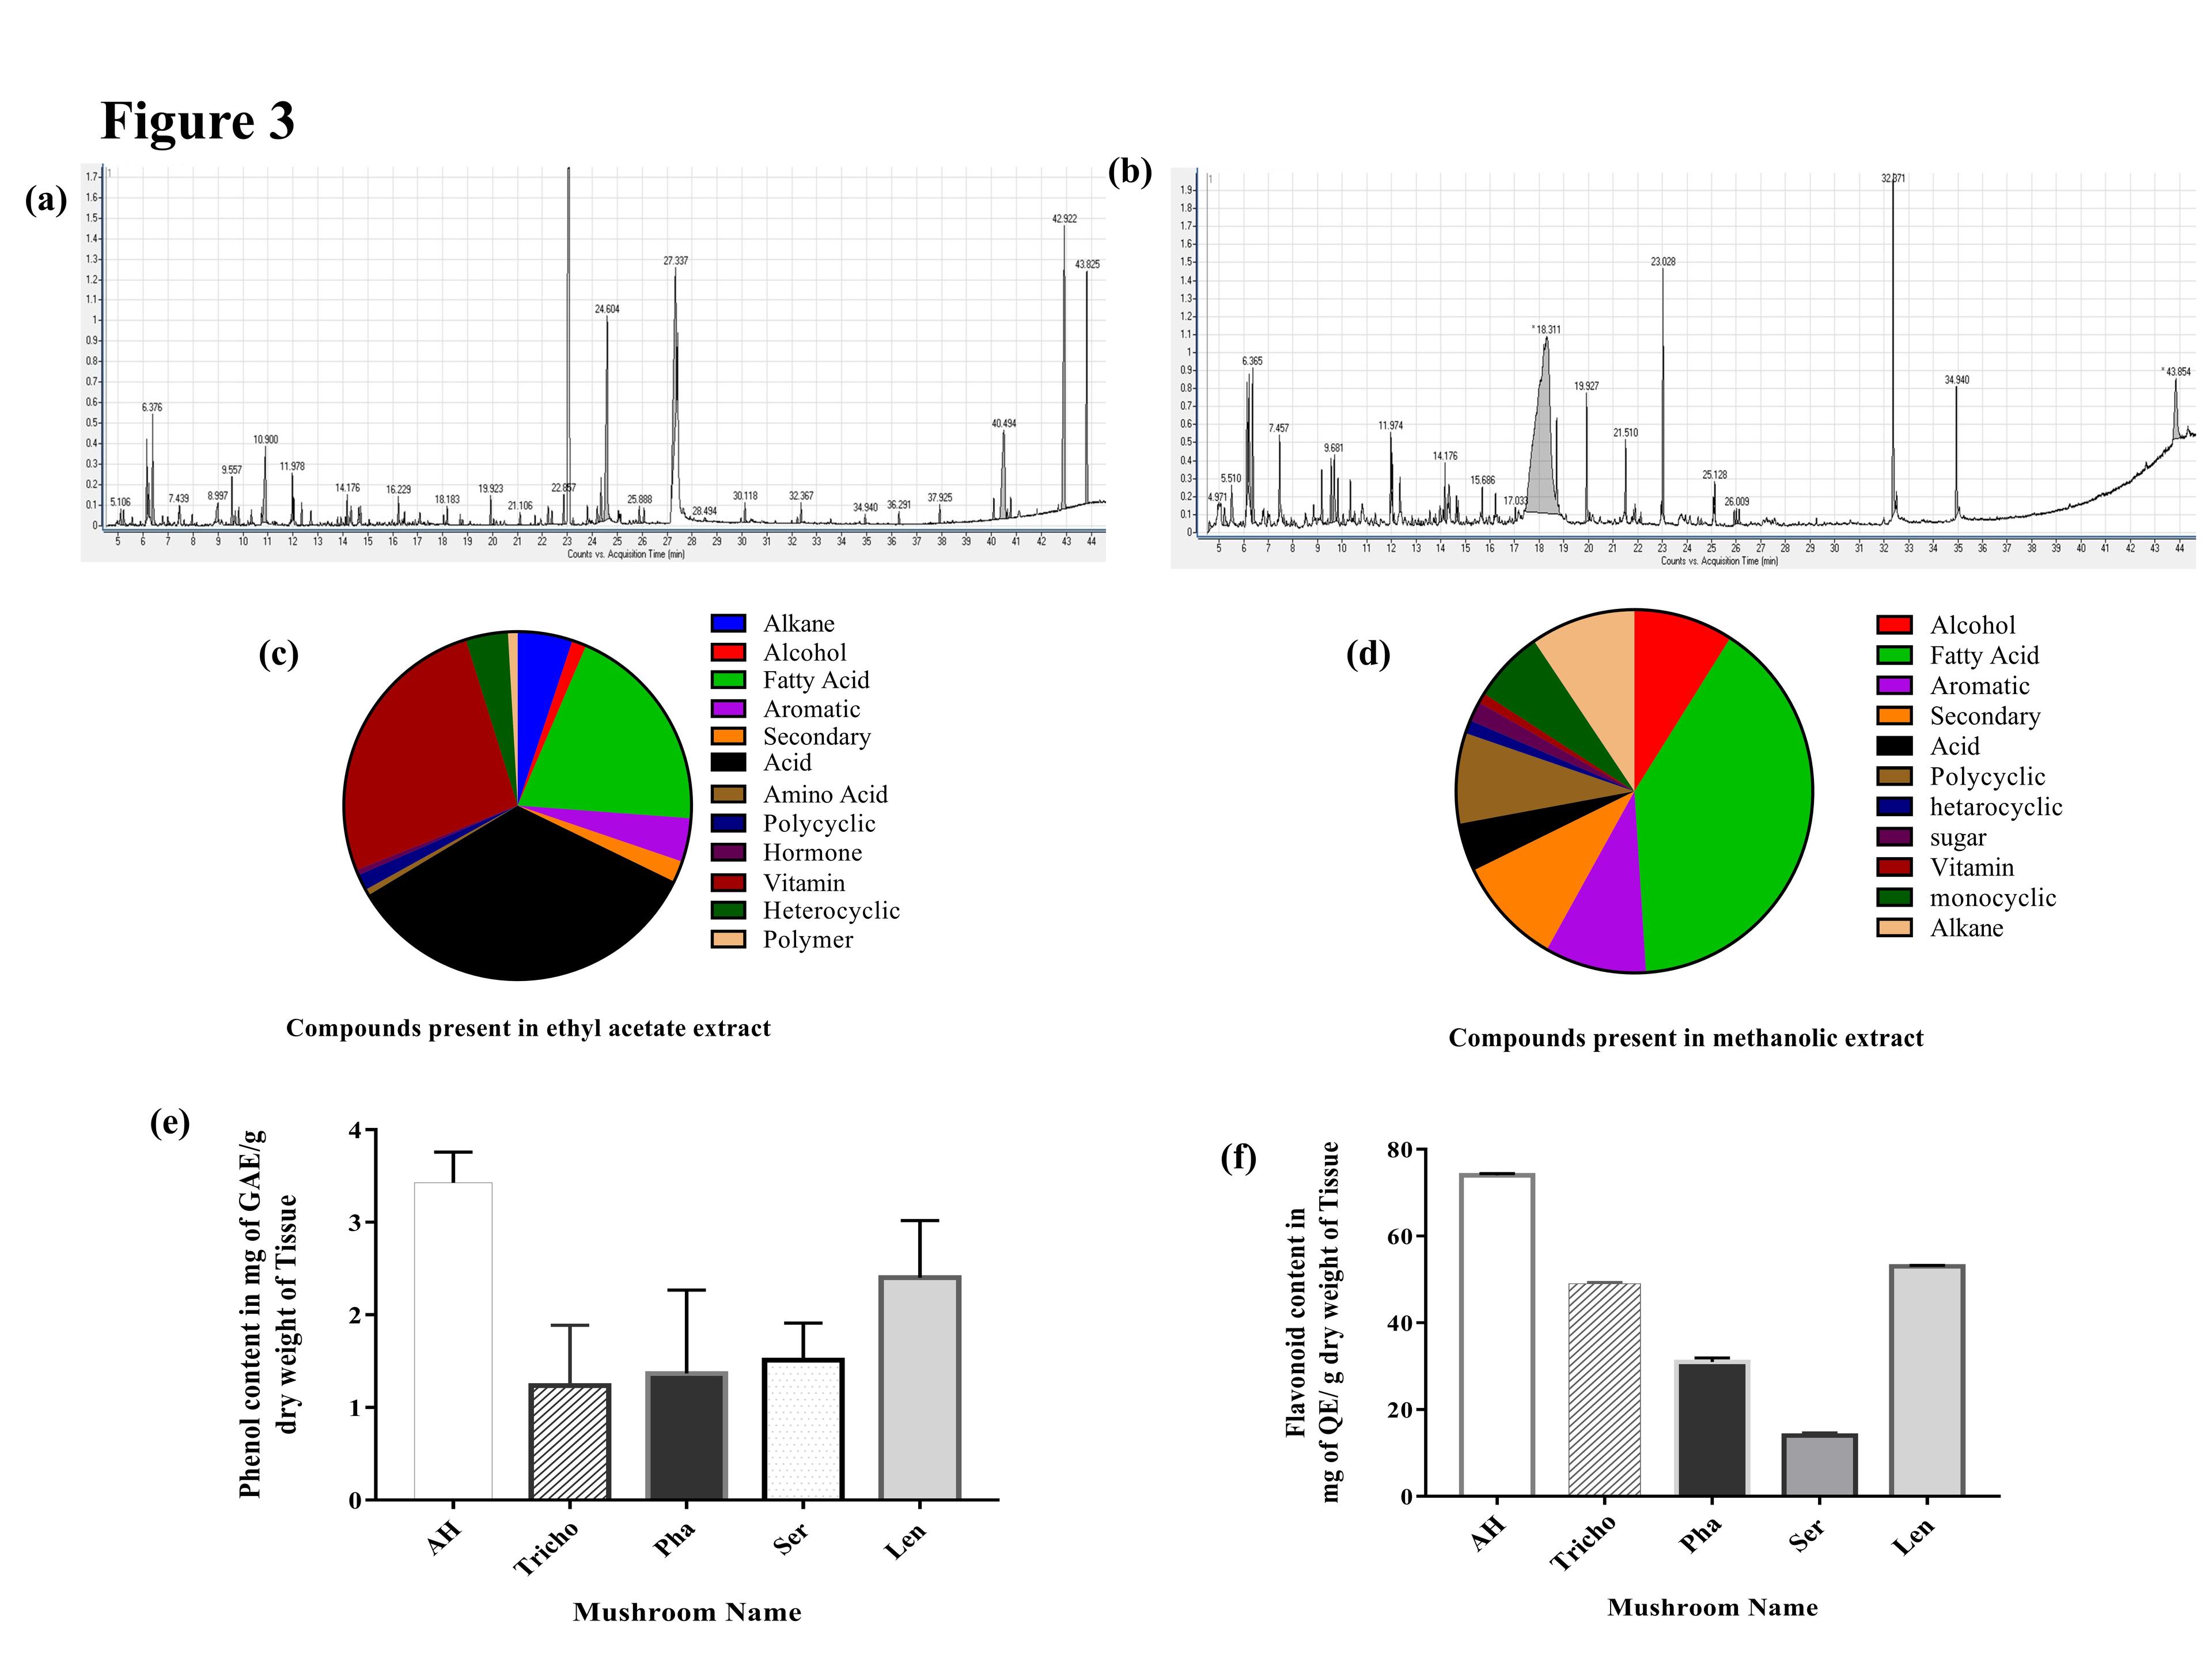 Assessment of the anti-leukemic and antioxidant potential of the methanol extract of a wild, edible, and novel mushroom, Astraeus hygrometricus, and unraveling its metabolomic profile